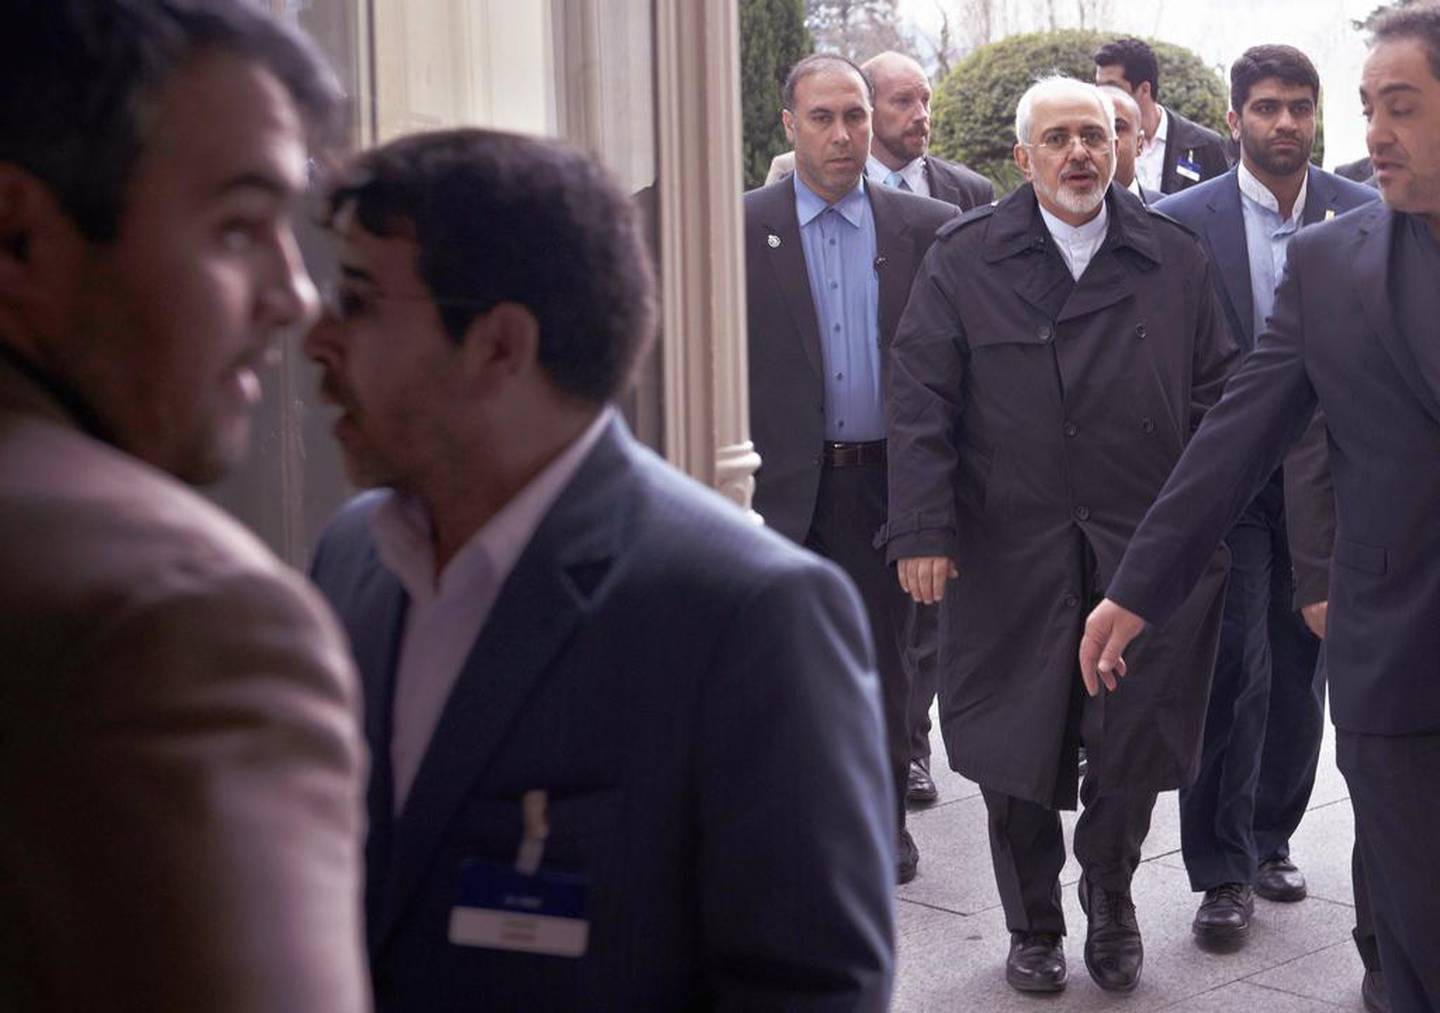 Iranian Foreign Minister Mohammad Javad Zarif led discussions that resulted in the 2015 nuclear deal. AP Photo